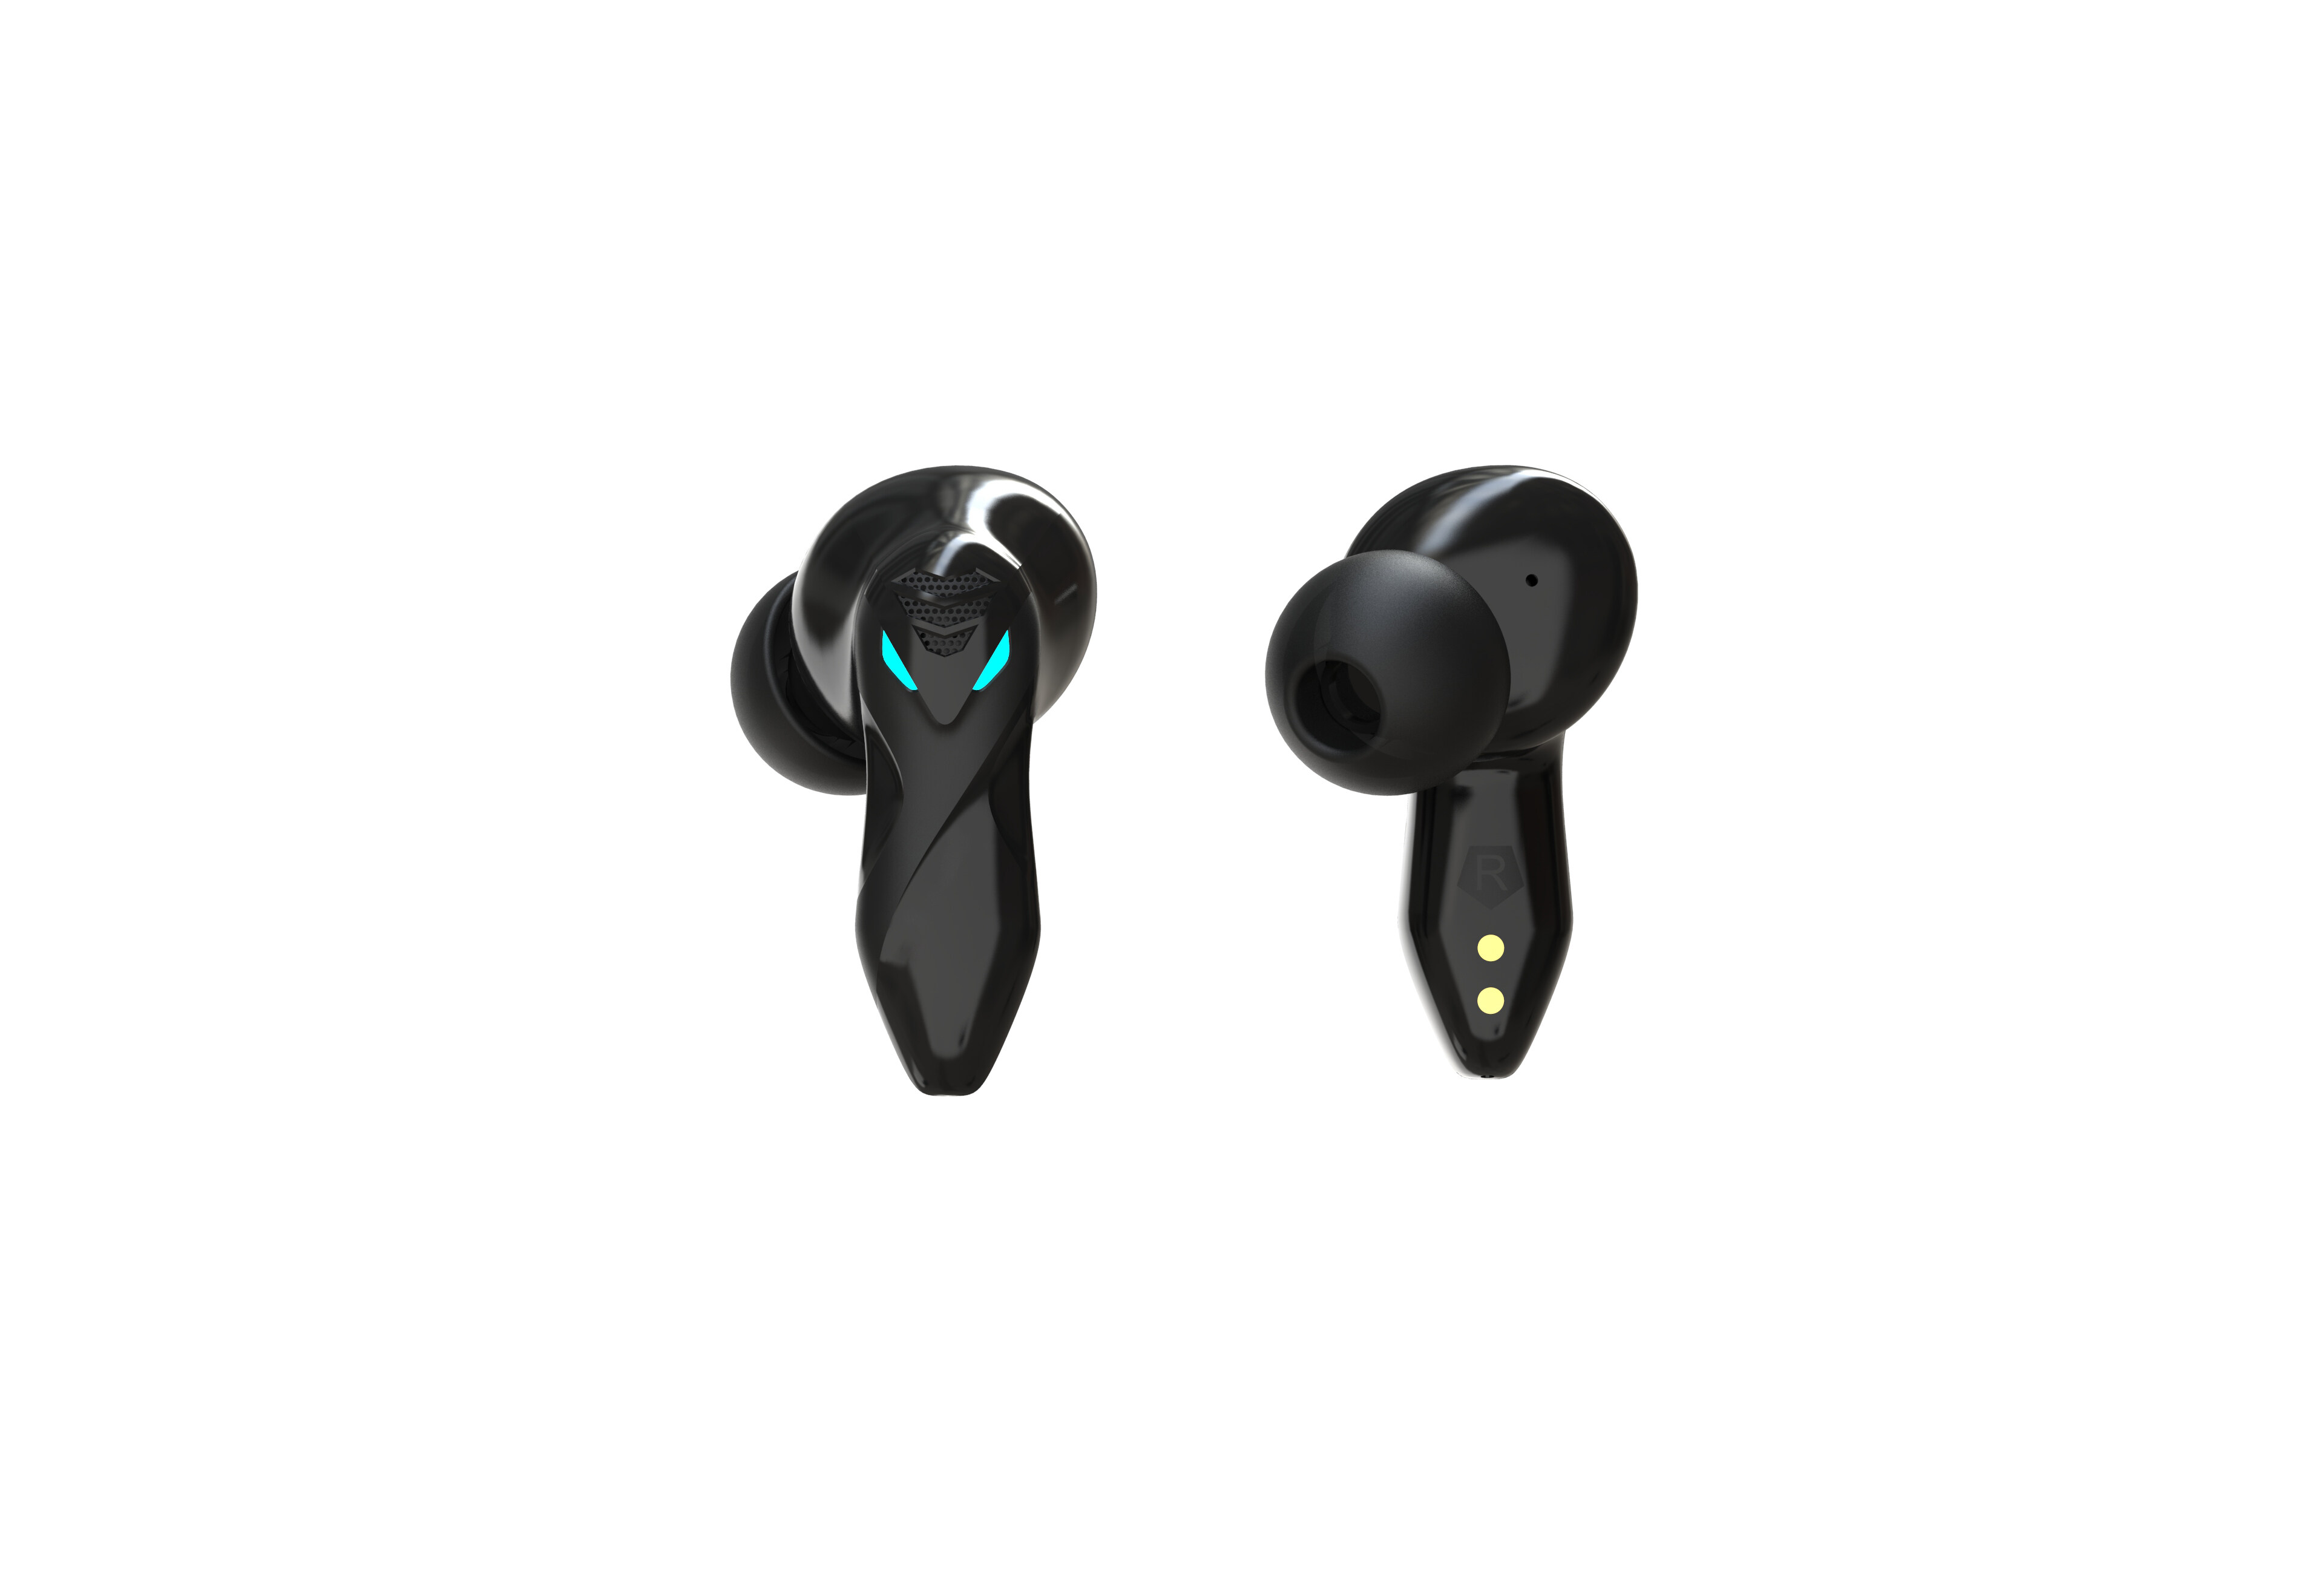 Happyaudio; tws factory; private label tws; china tws factory; OEM Audio Products; Wireless Earbuds Manufacturer; Custom tws manufacturer China; new tws; audio manufacturing; tws model; gaming tws; tws with low latency; unique tws;china electronic manufacturing services